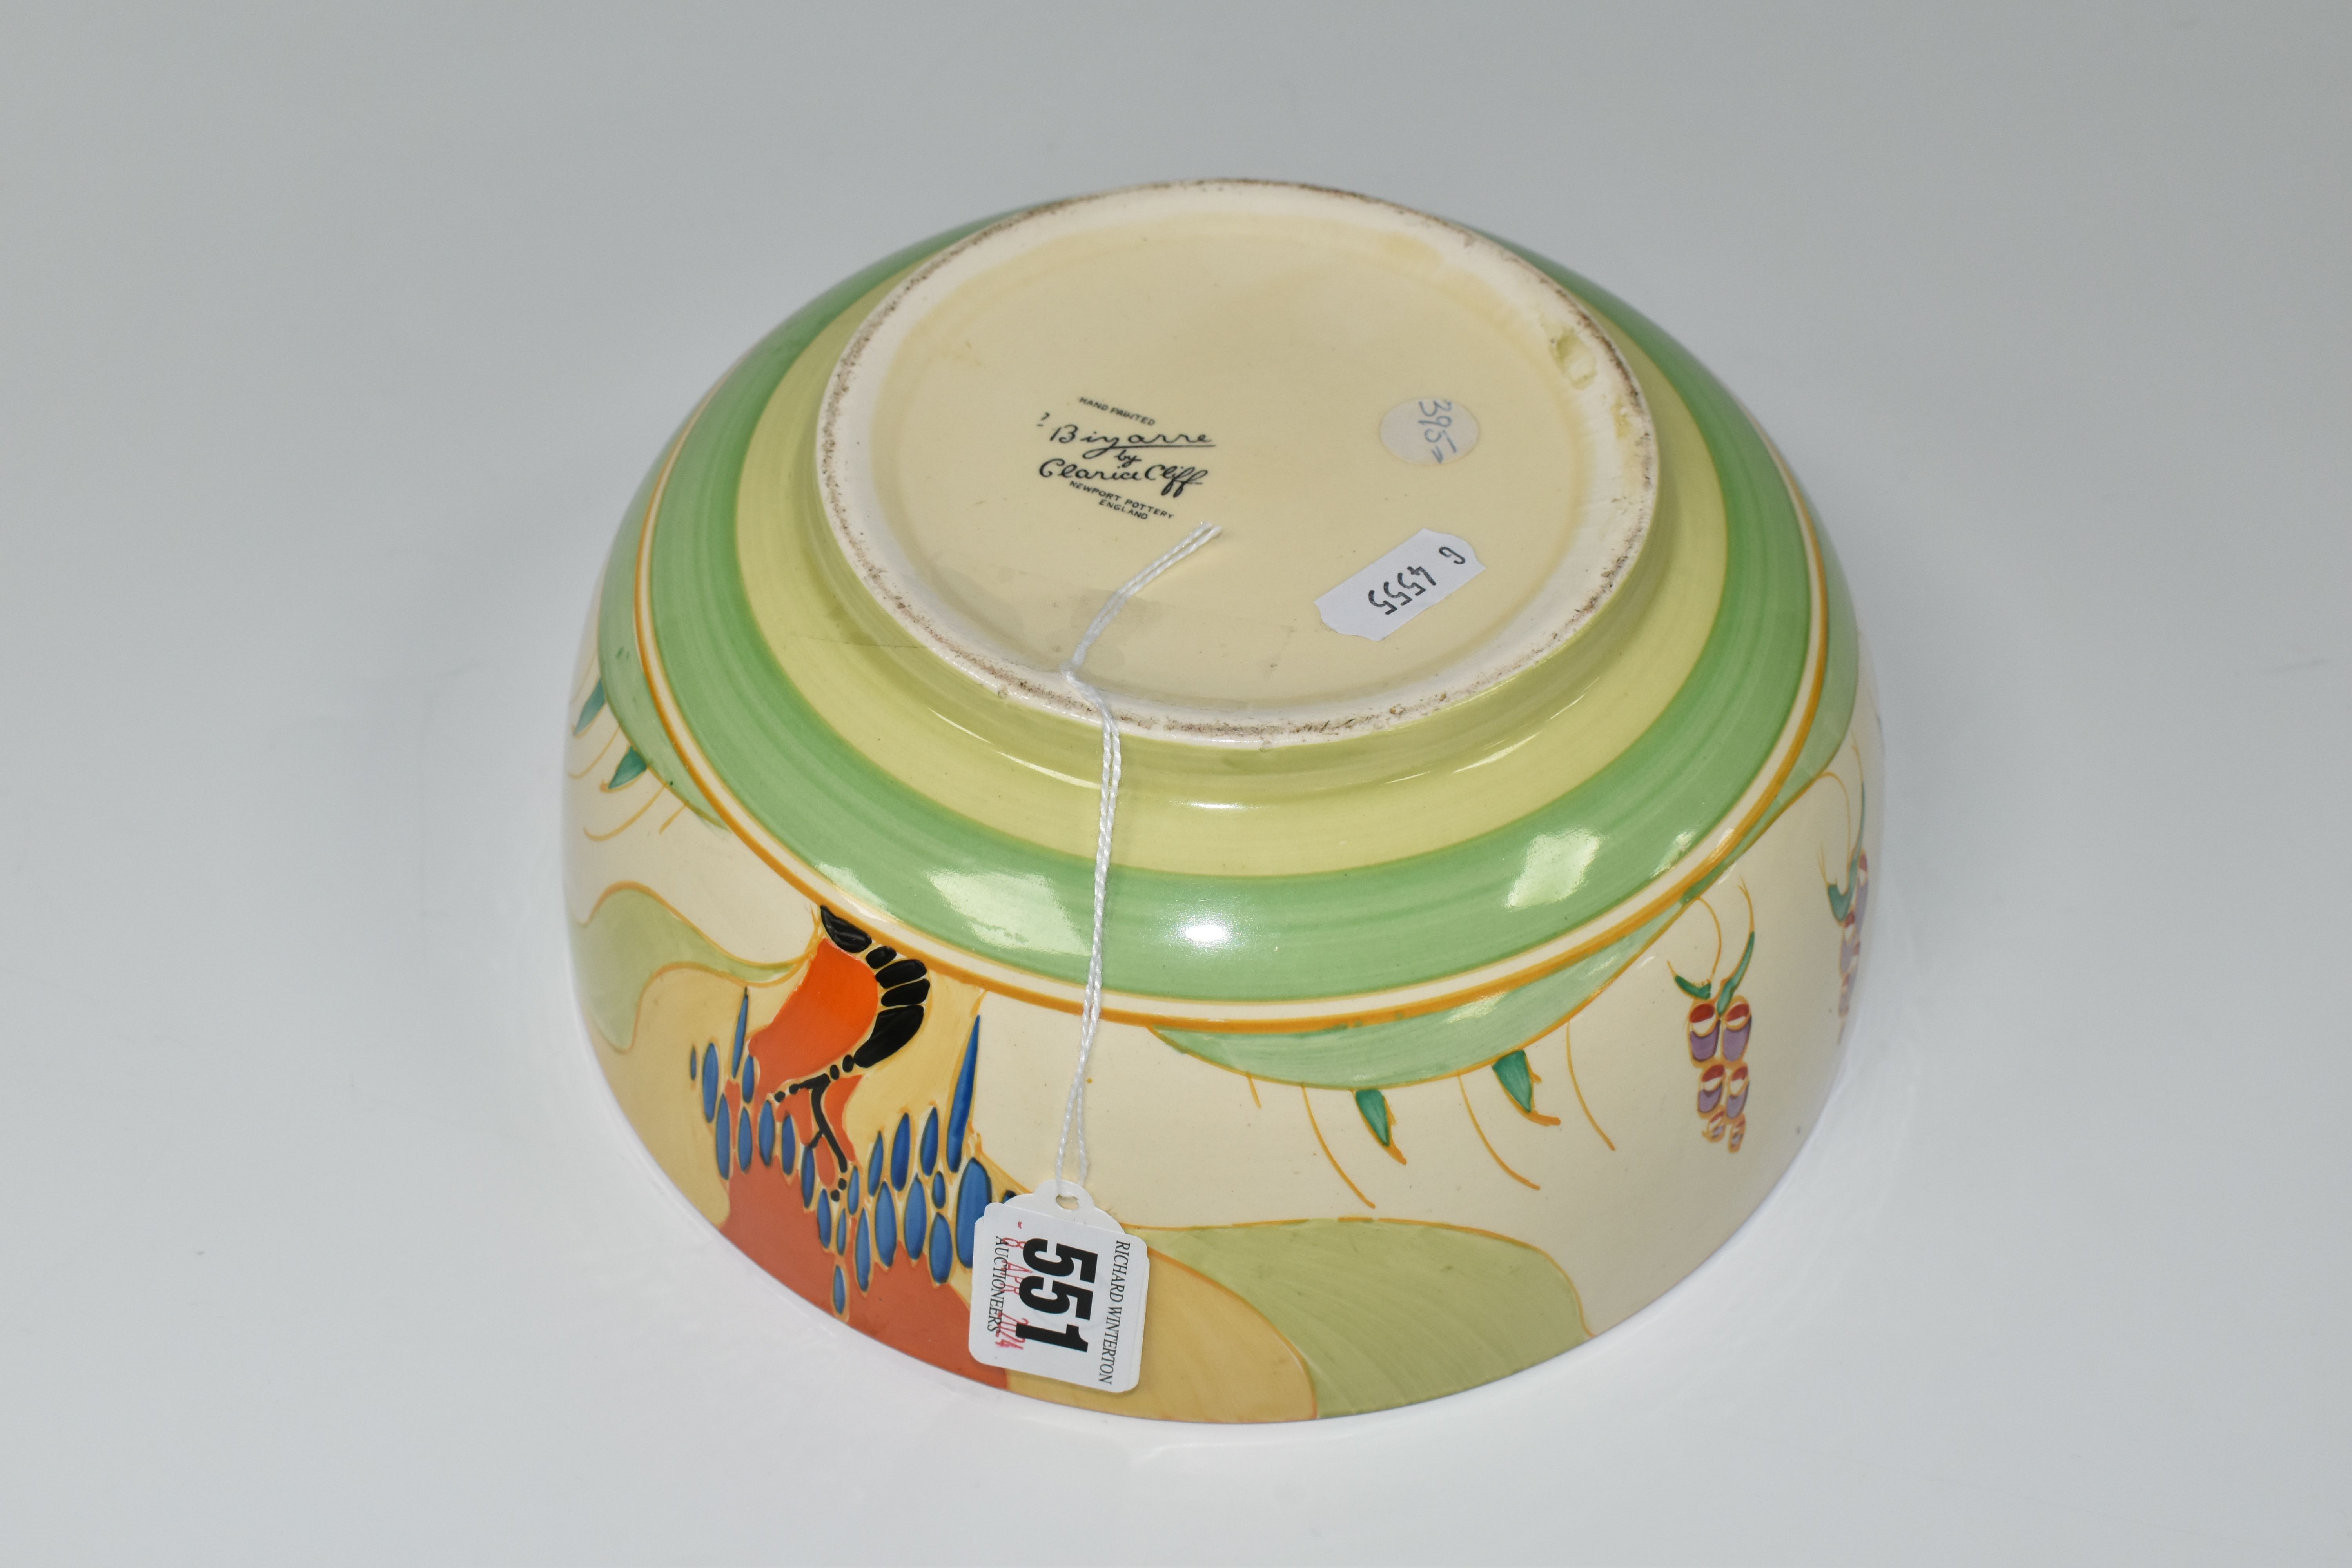 A CLARICE CLIFF 'WINDBELLS' DESIGN BOWL, with a vibrant orange, yellow, green and cream banding on - Image 6 of 7